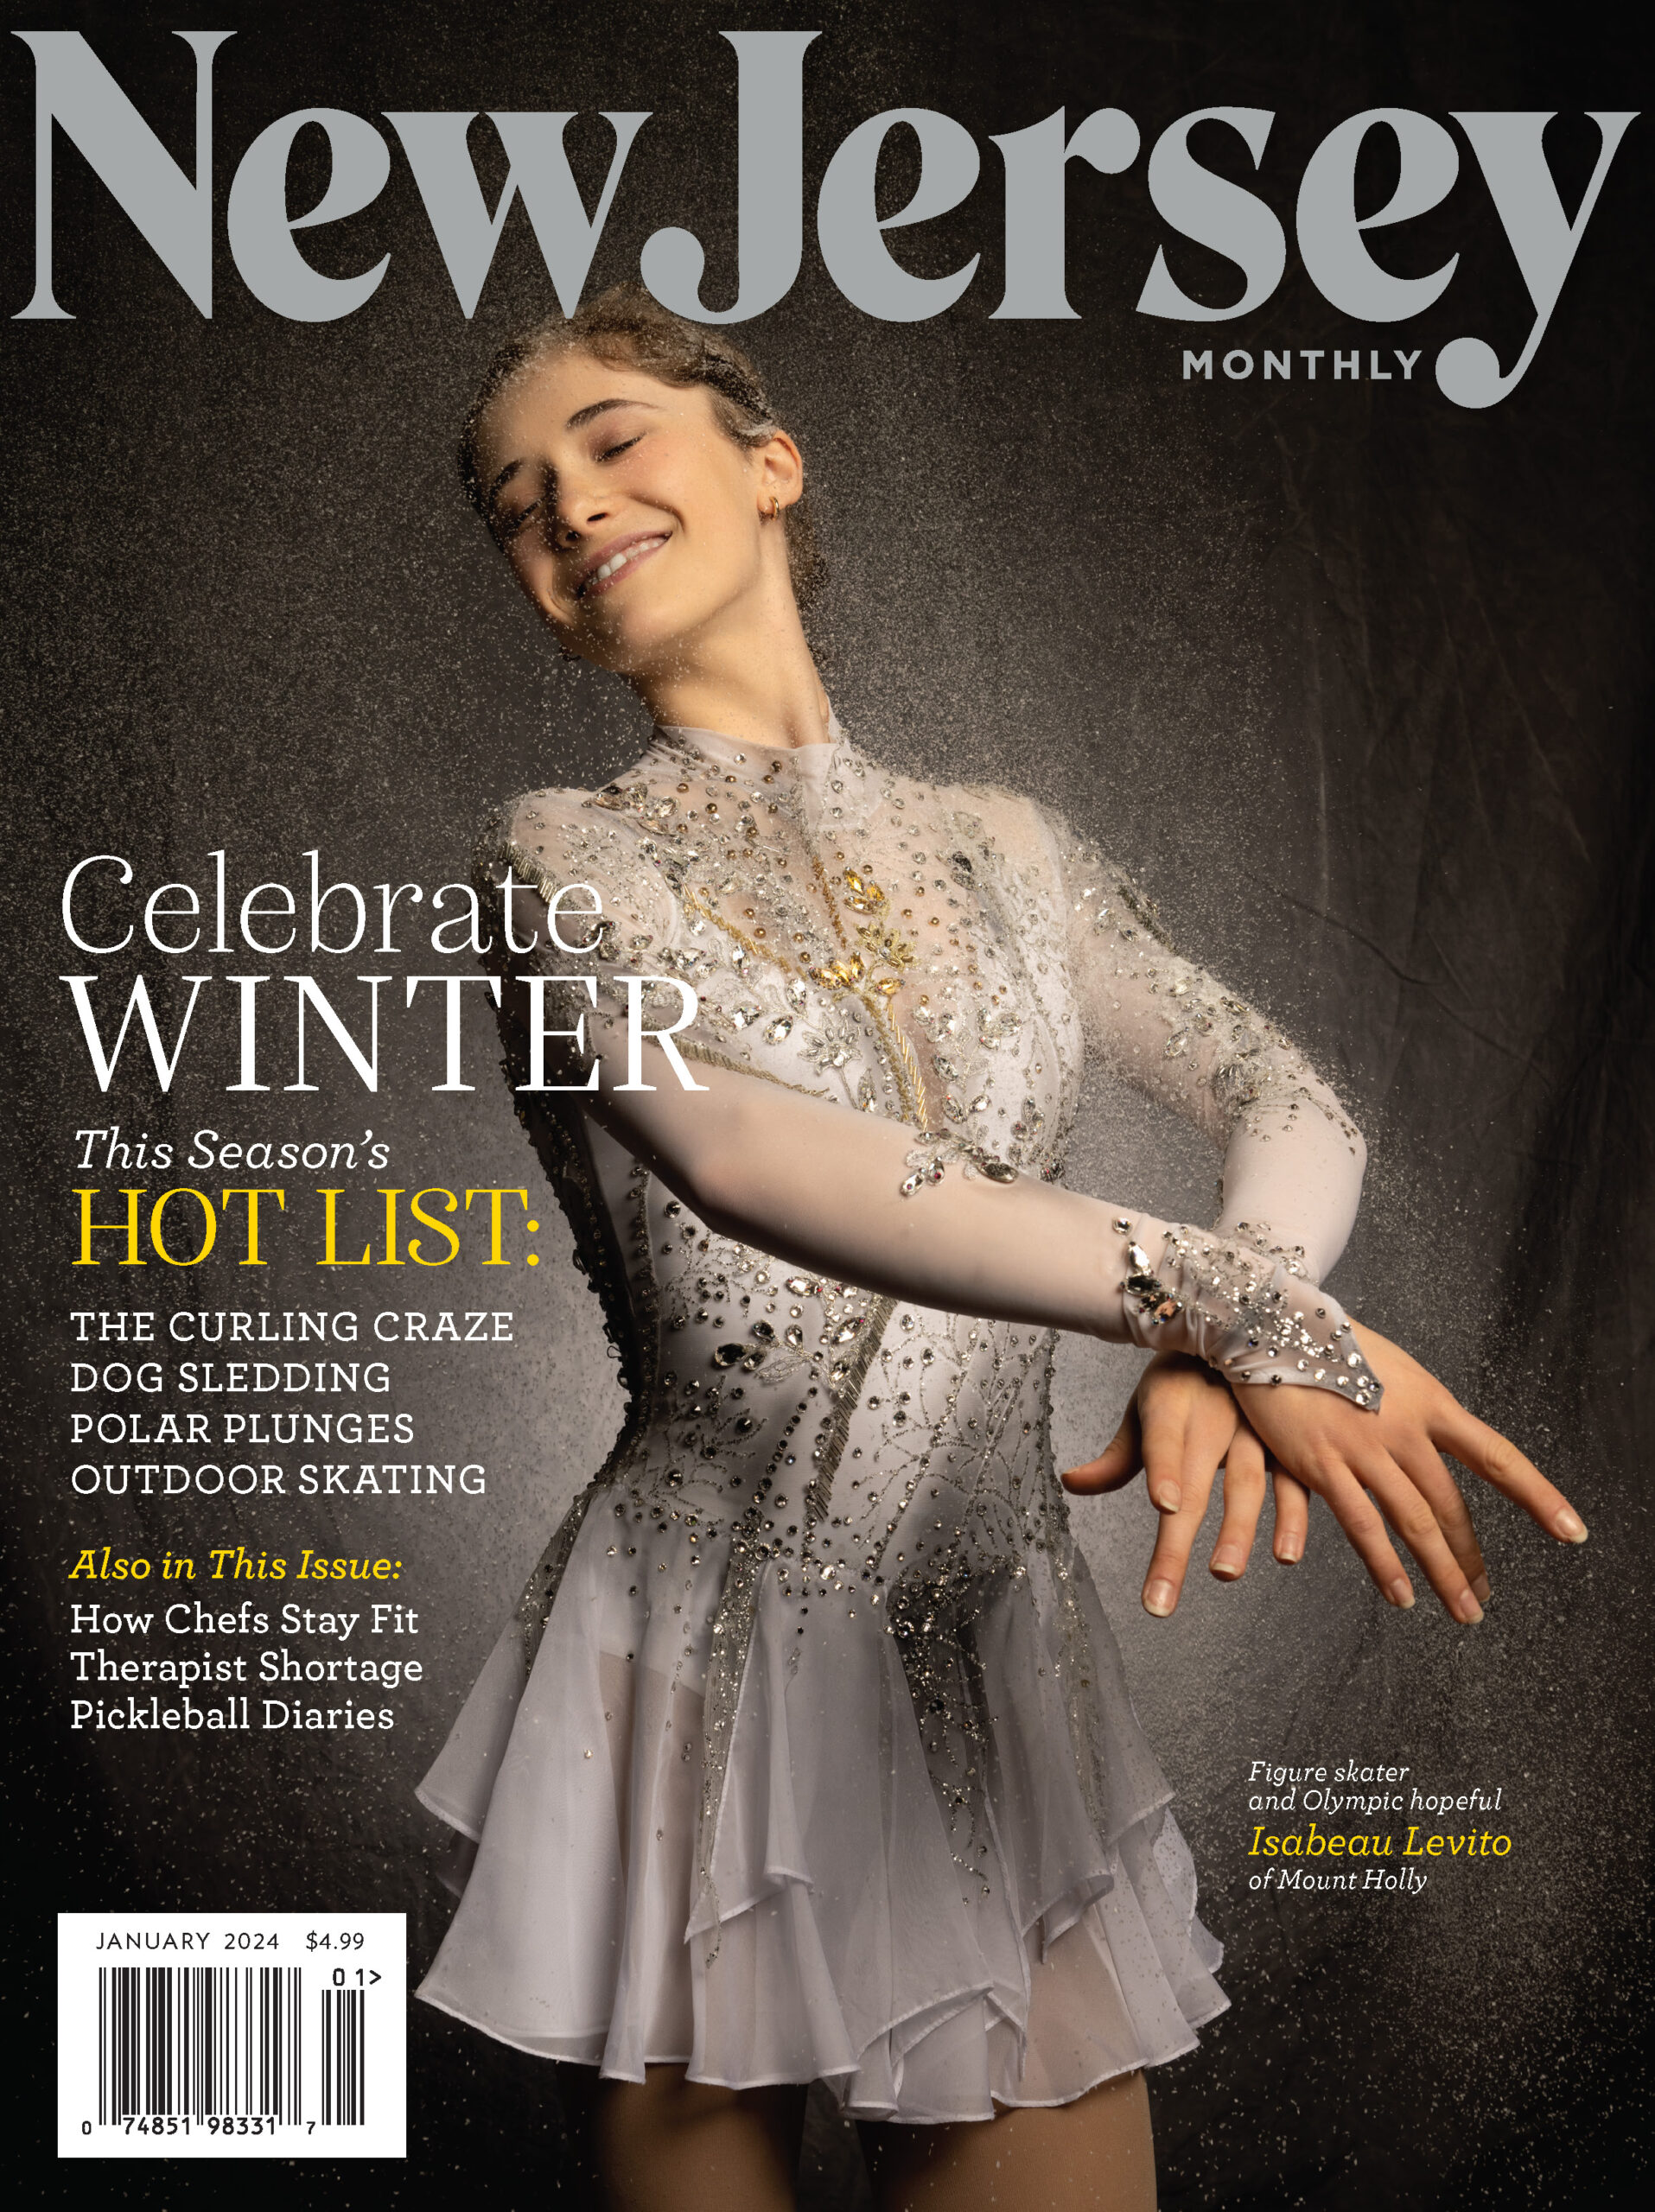 January 2024 cover of New Jersey Monthly magazine